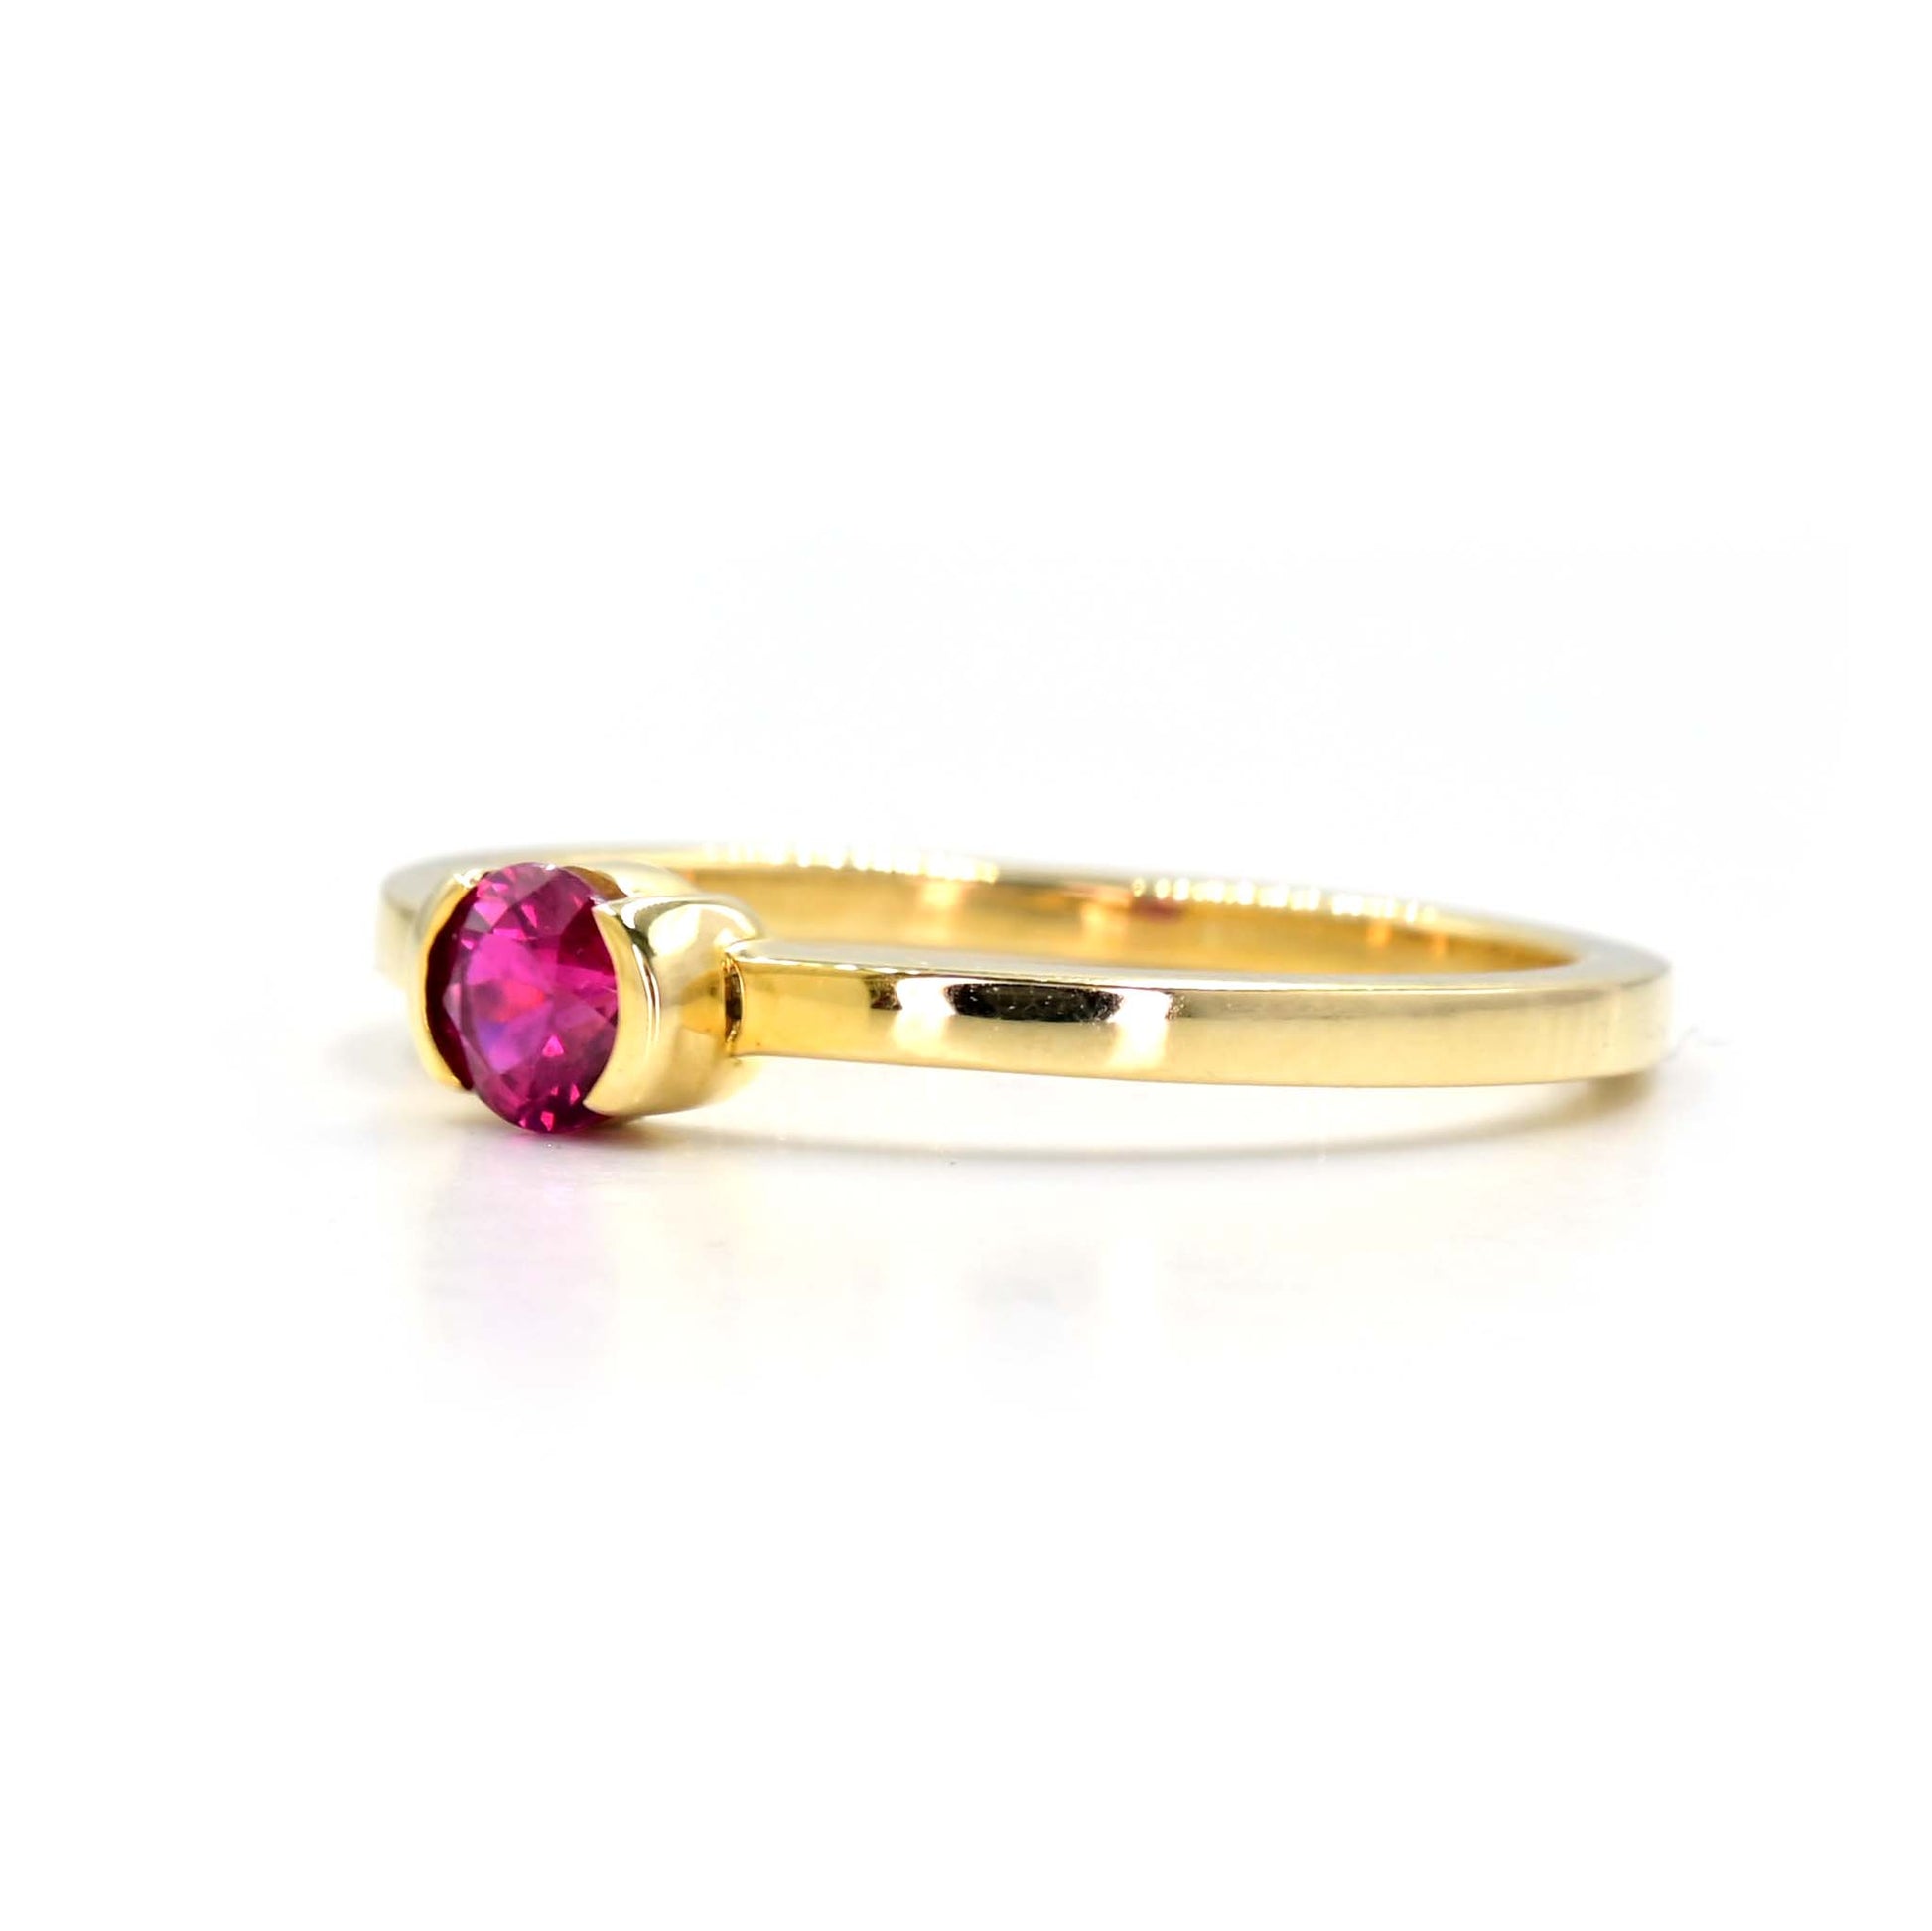 Natural ruby ring in yellow gold from Chiang Mai, Thailand